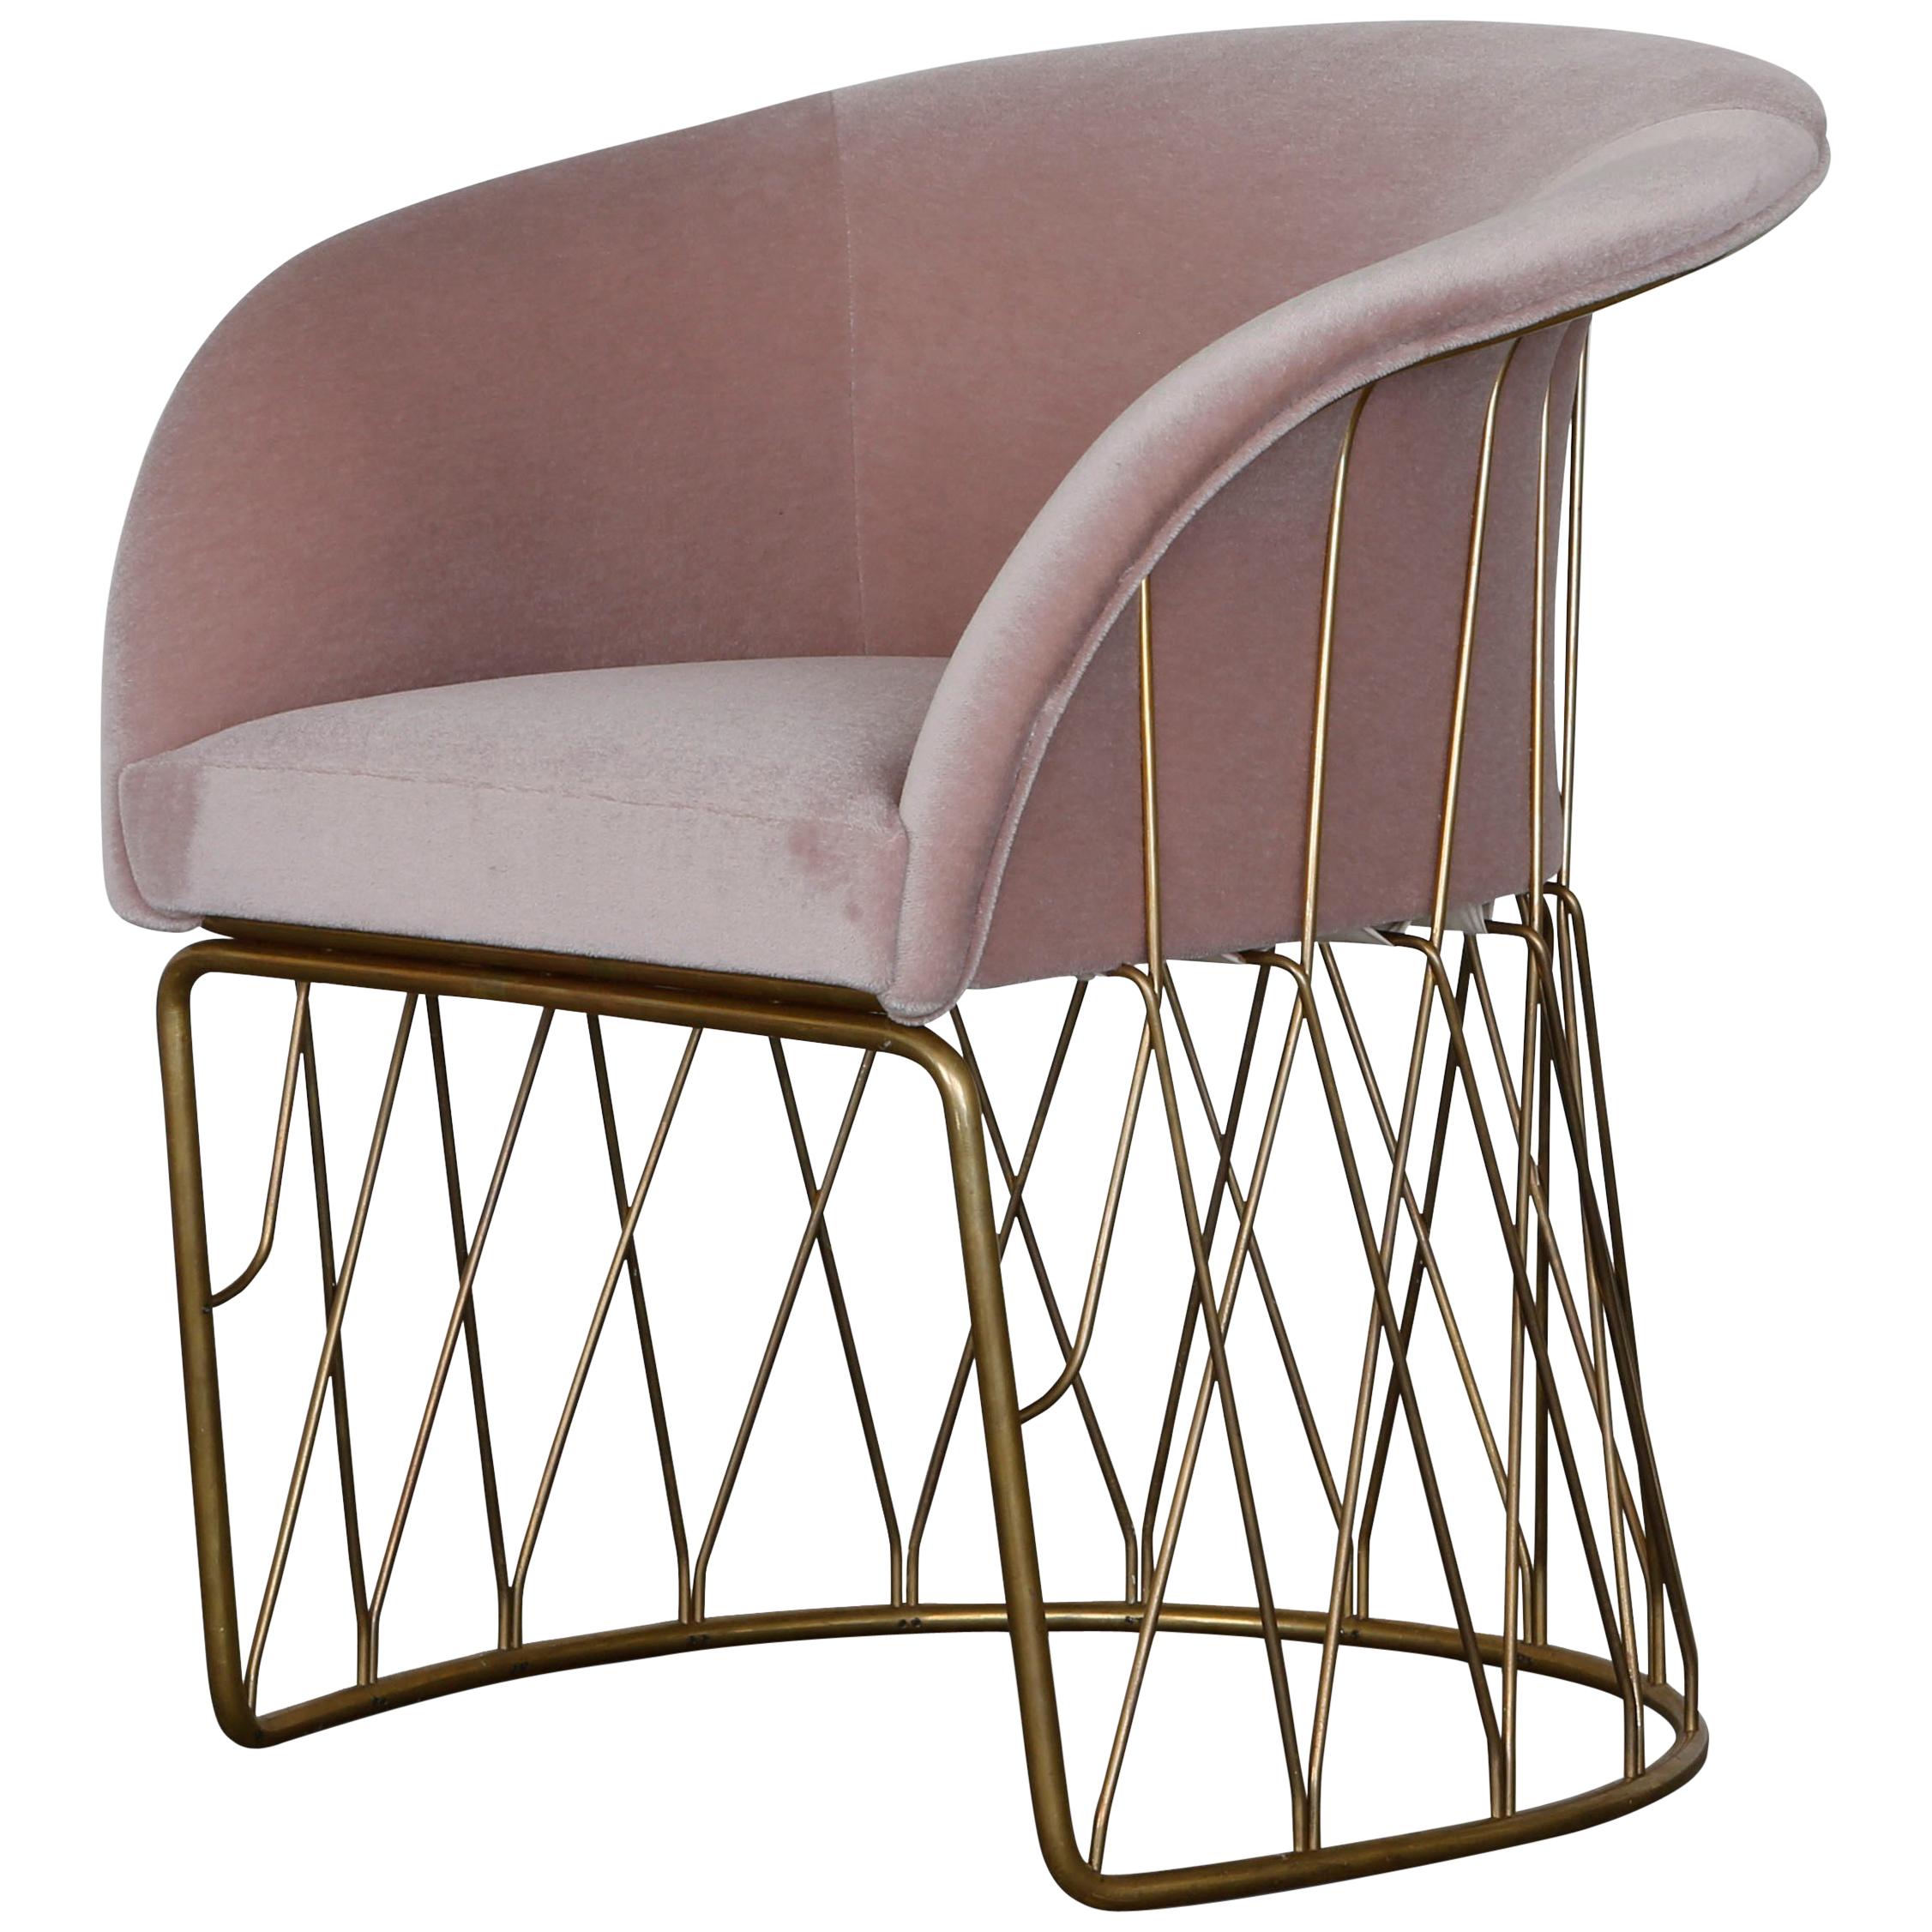 Upholstered Equipal Chair with Brass Frame by Pedro Ramírez Vázquez for Luteca